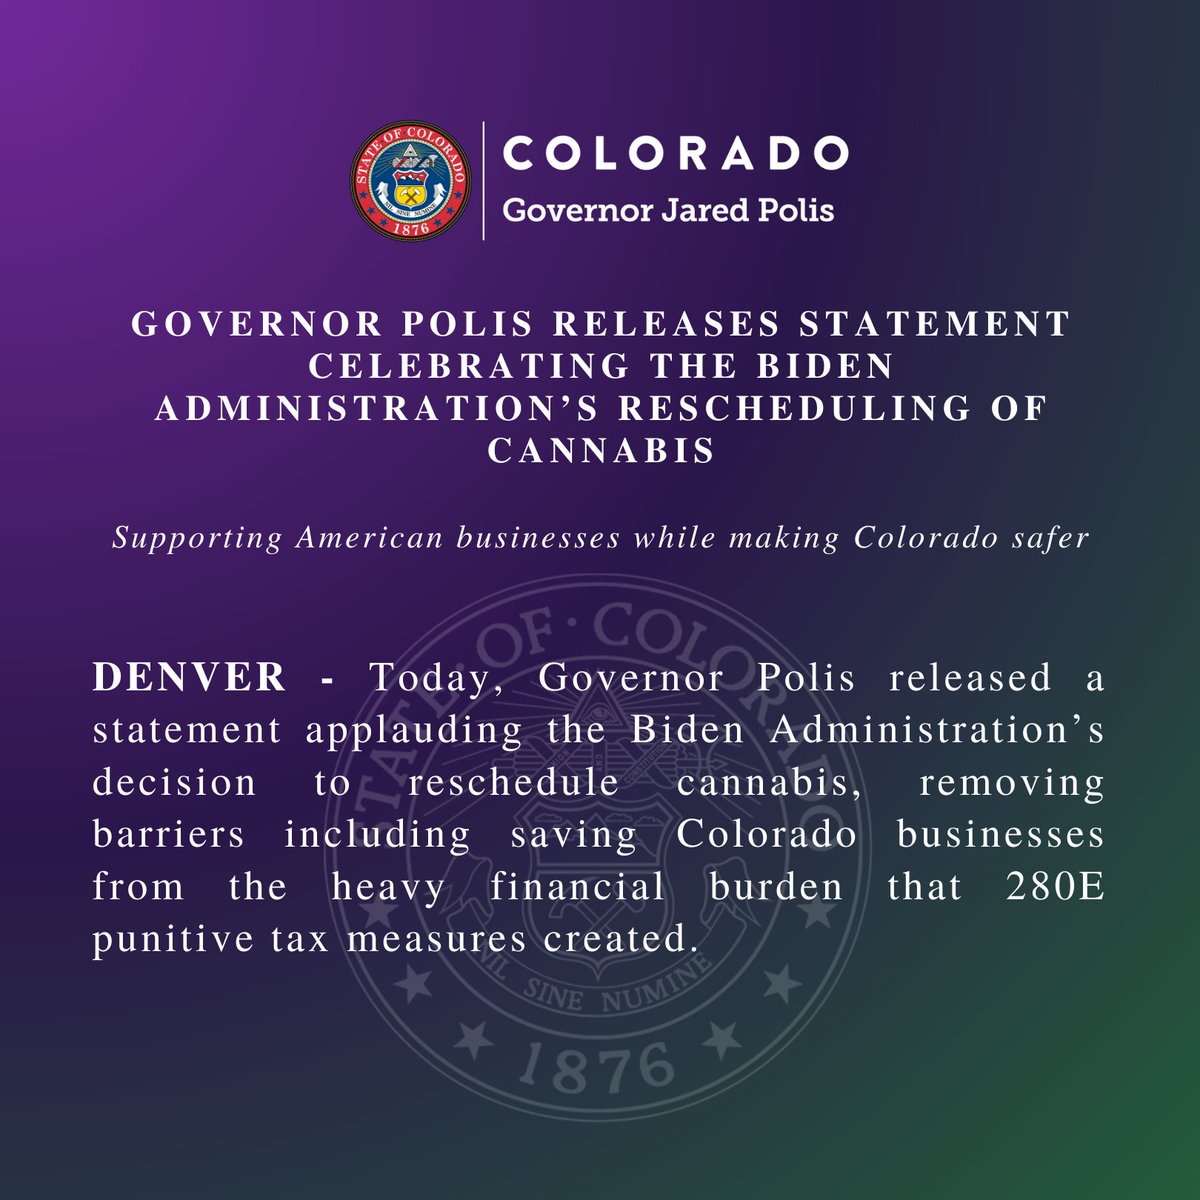 I am thrilled by the Biden Administration’s decision to begin the process of finally rescheduling cannabis, following the lead of Colorado voters and 37 other states that have already legalized marijuana for medical or adult use, correcting decades of outdated federal policy.